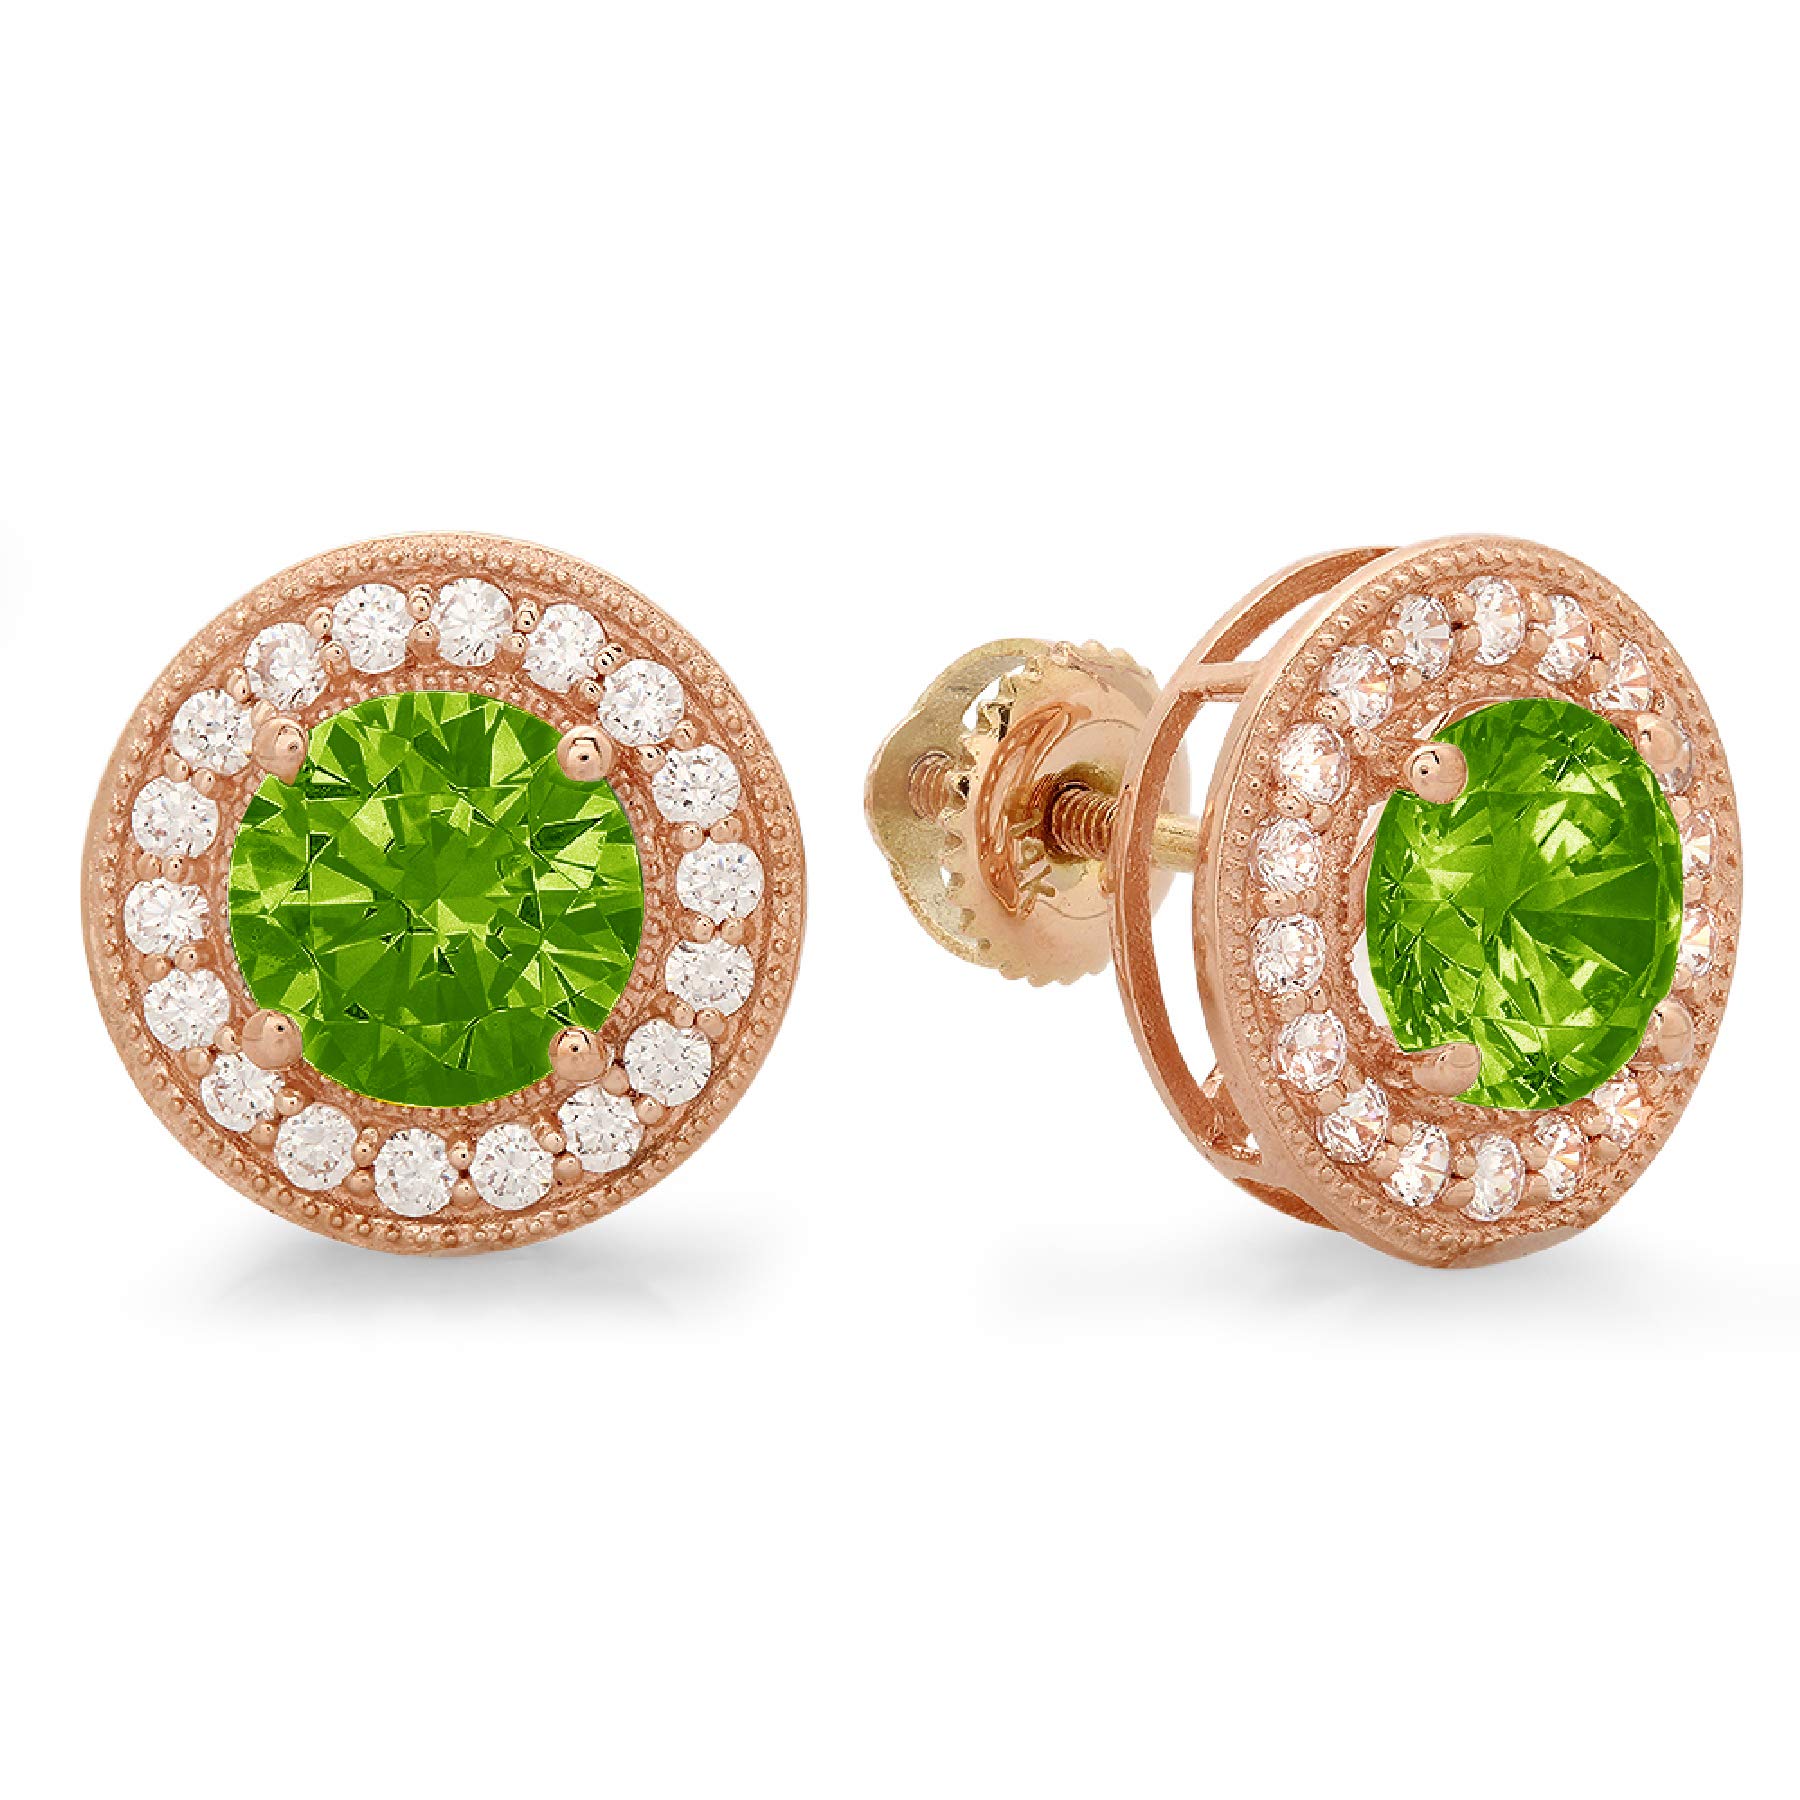 Clara Pucci 3.7 ct Brilliant Round Cut Halo Solitaire VVS1 Flawless Natural Green Peridot Gemstone Pair of Solitaire Stud Screw Back Earrings Solid 18K Rose Gold